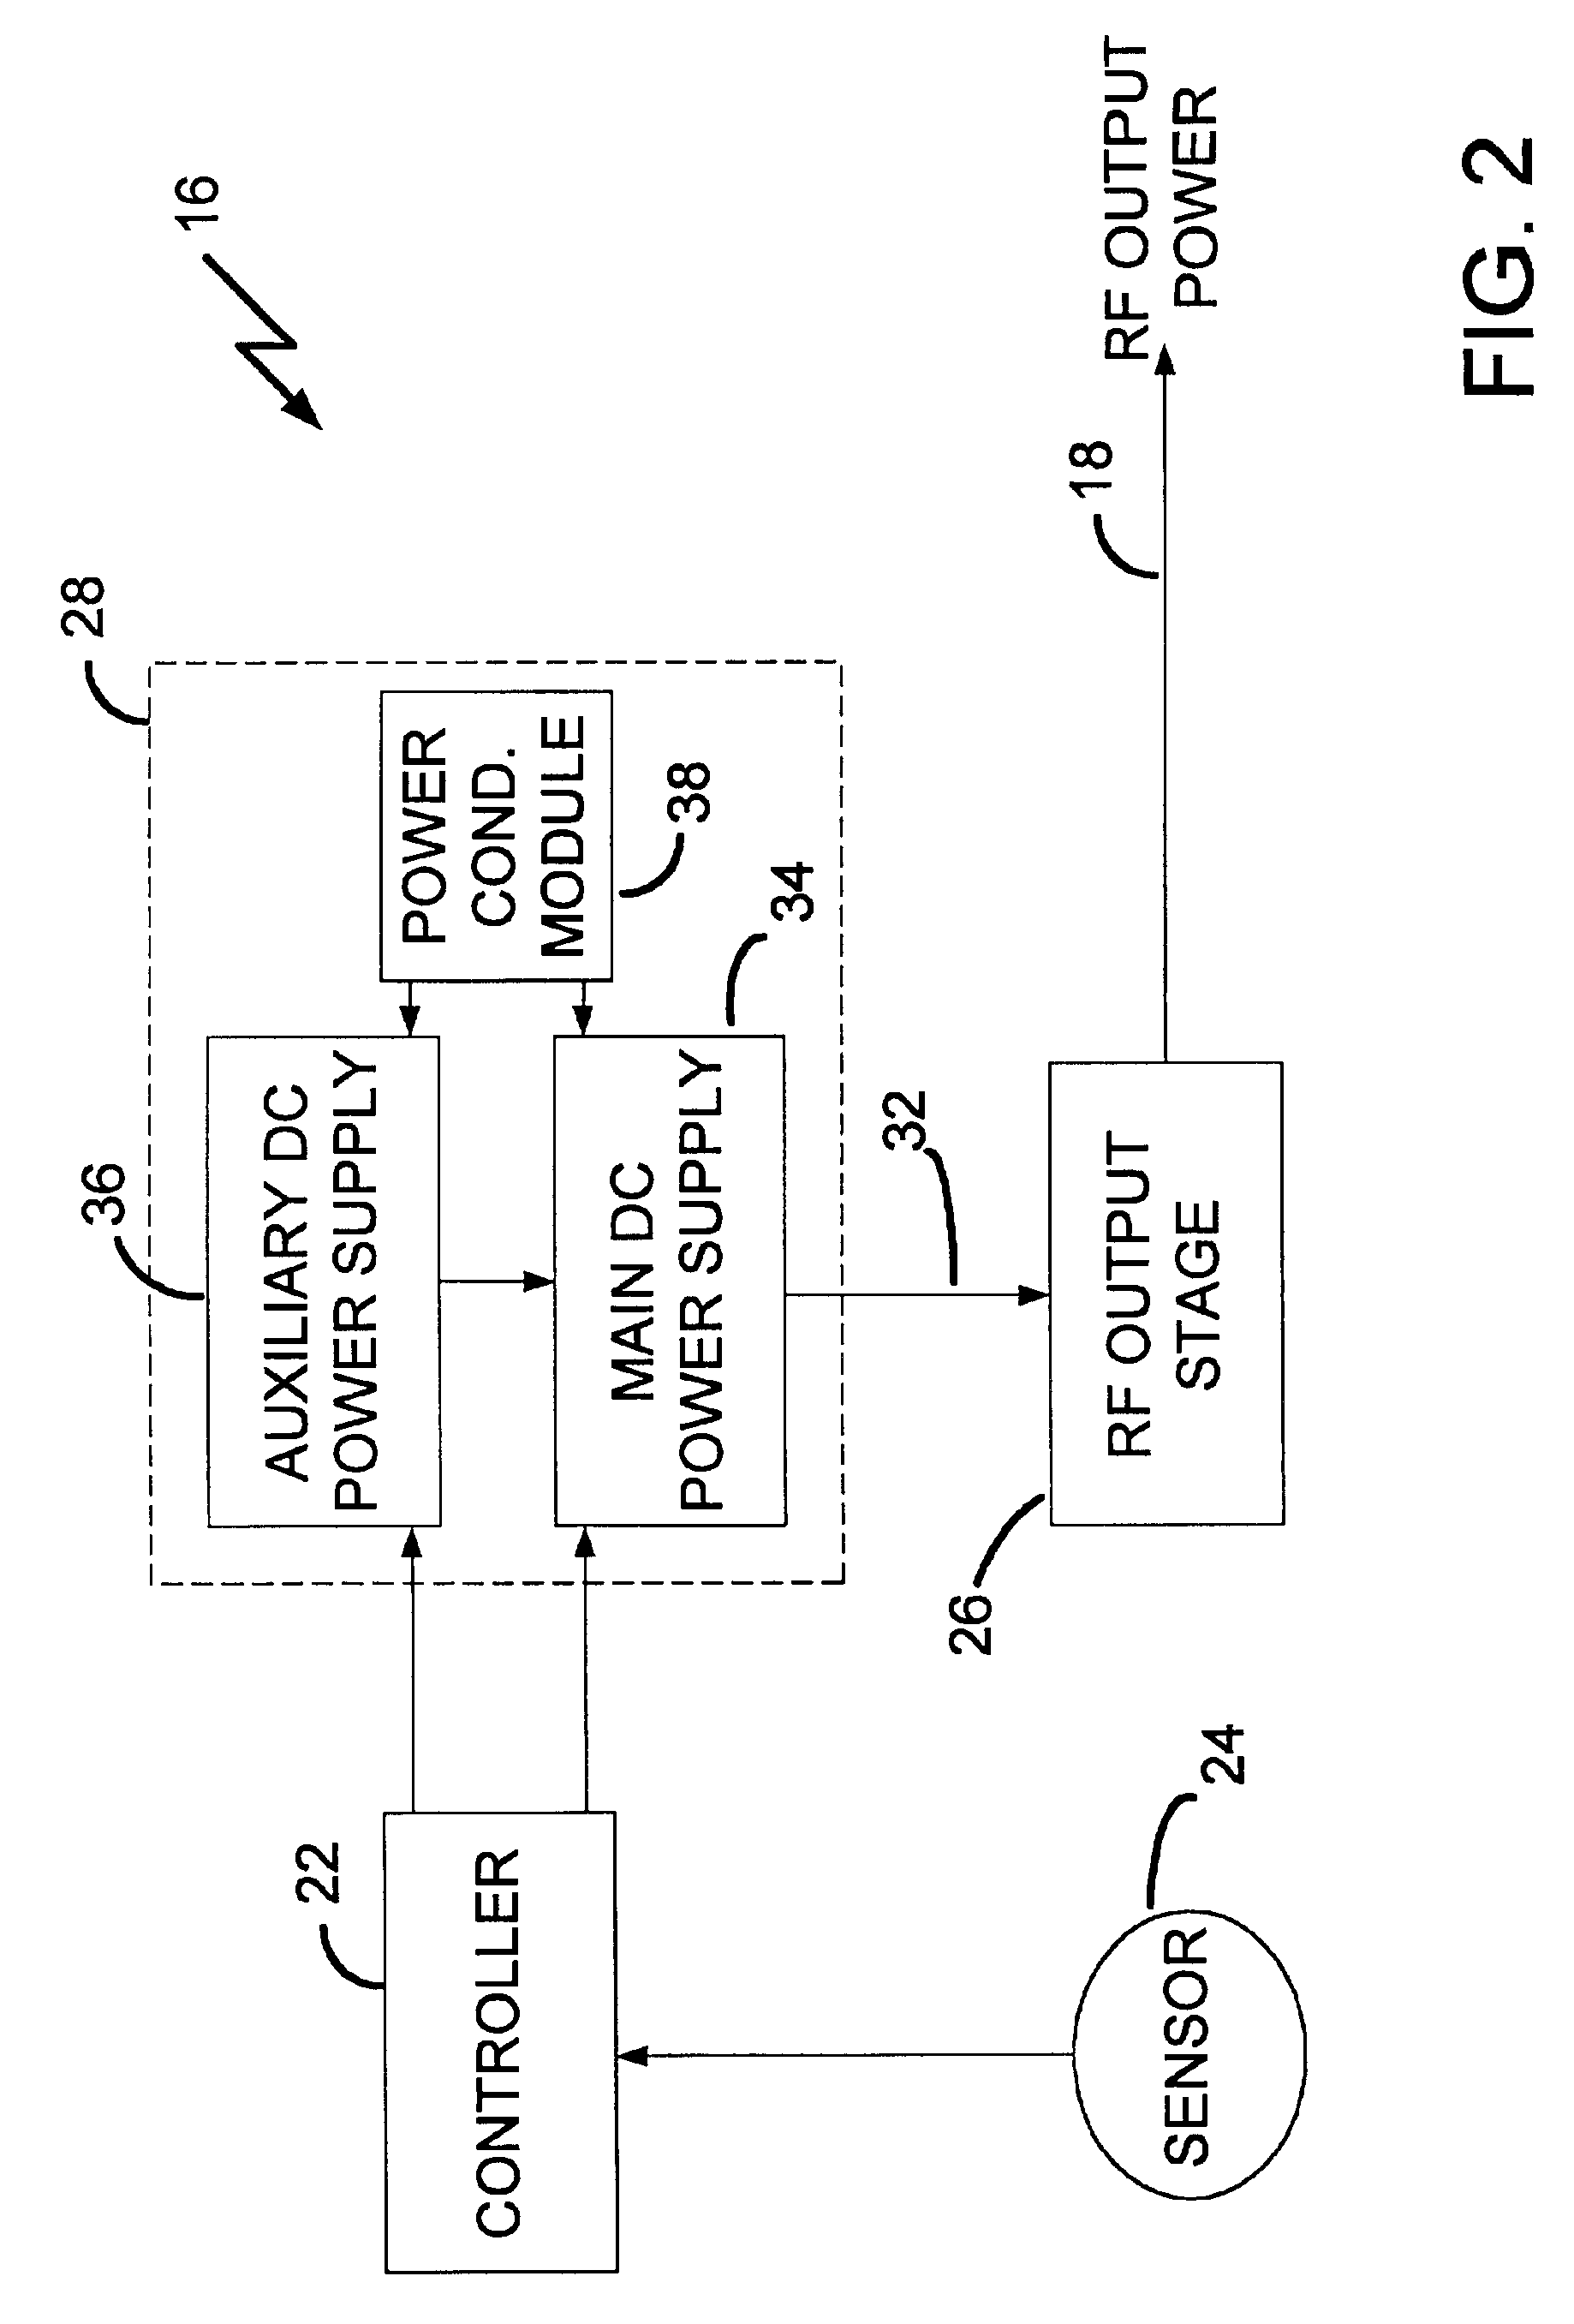 RF generating system with fast loop control